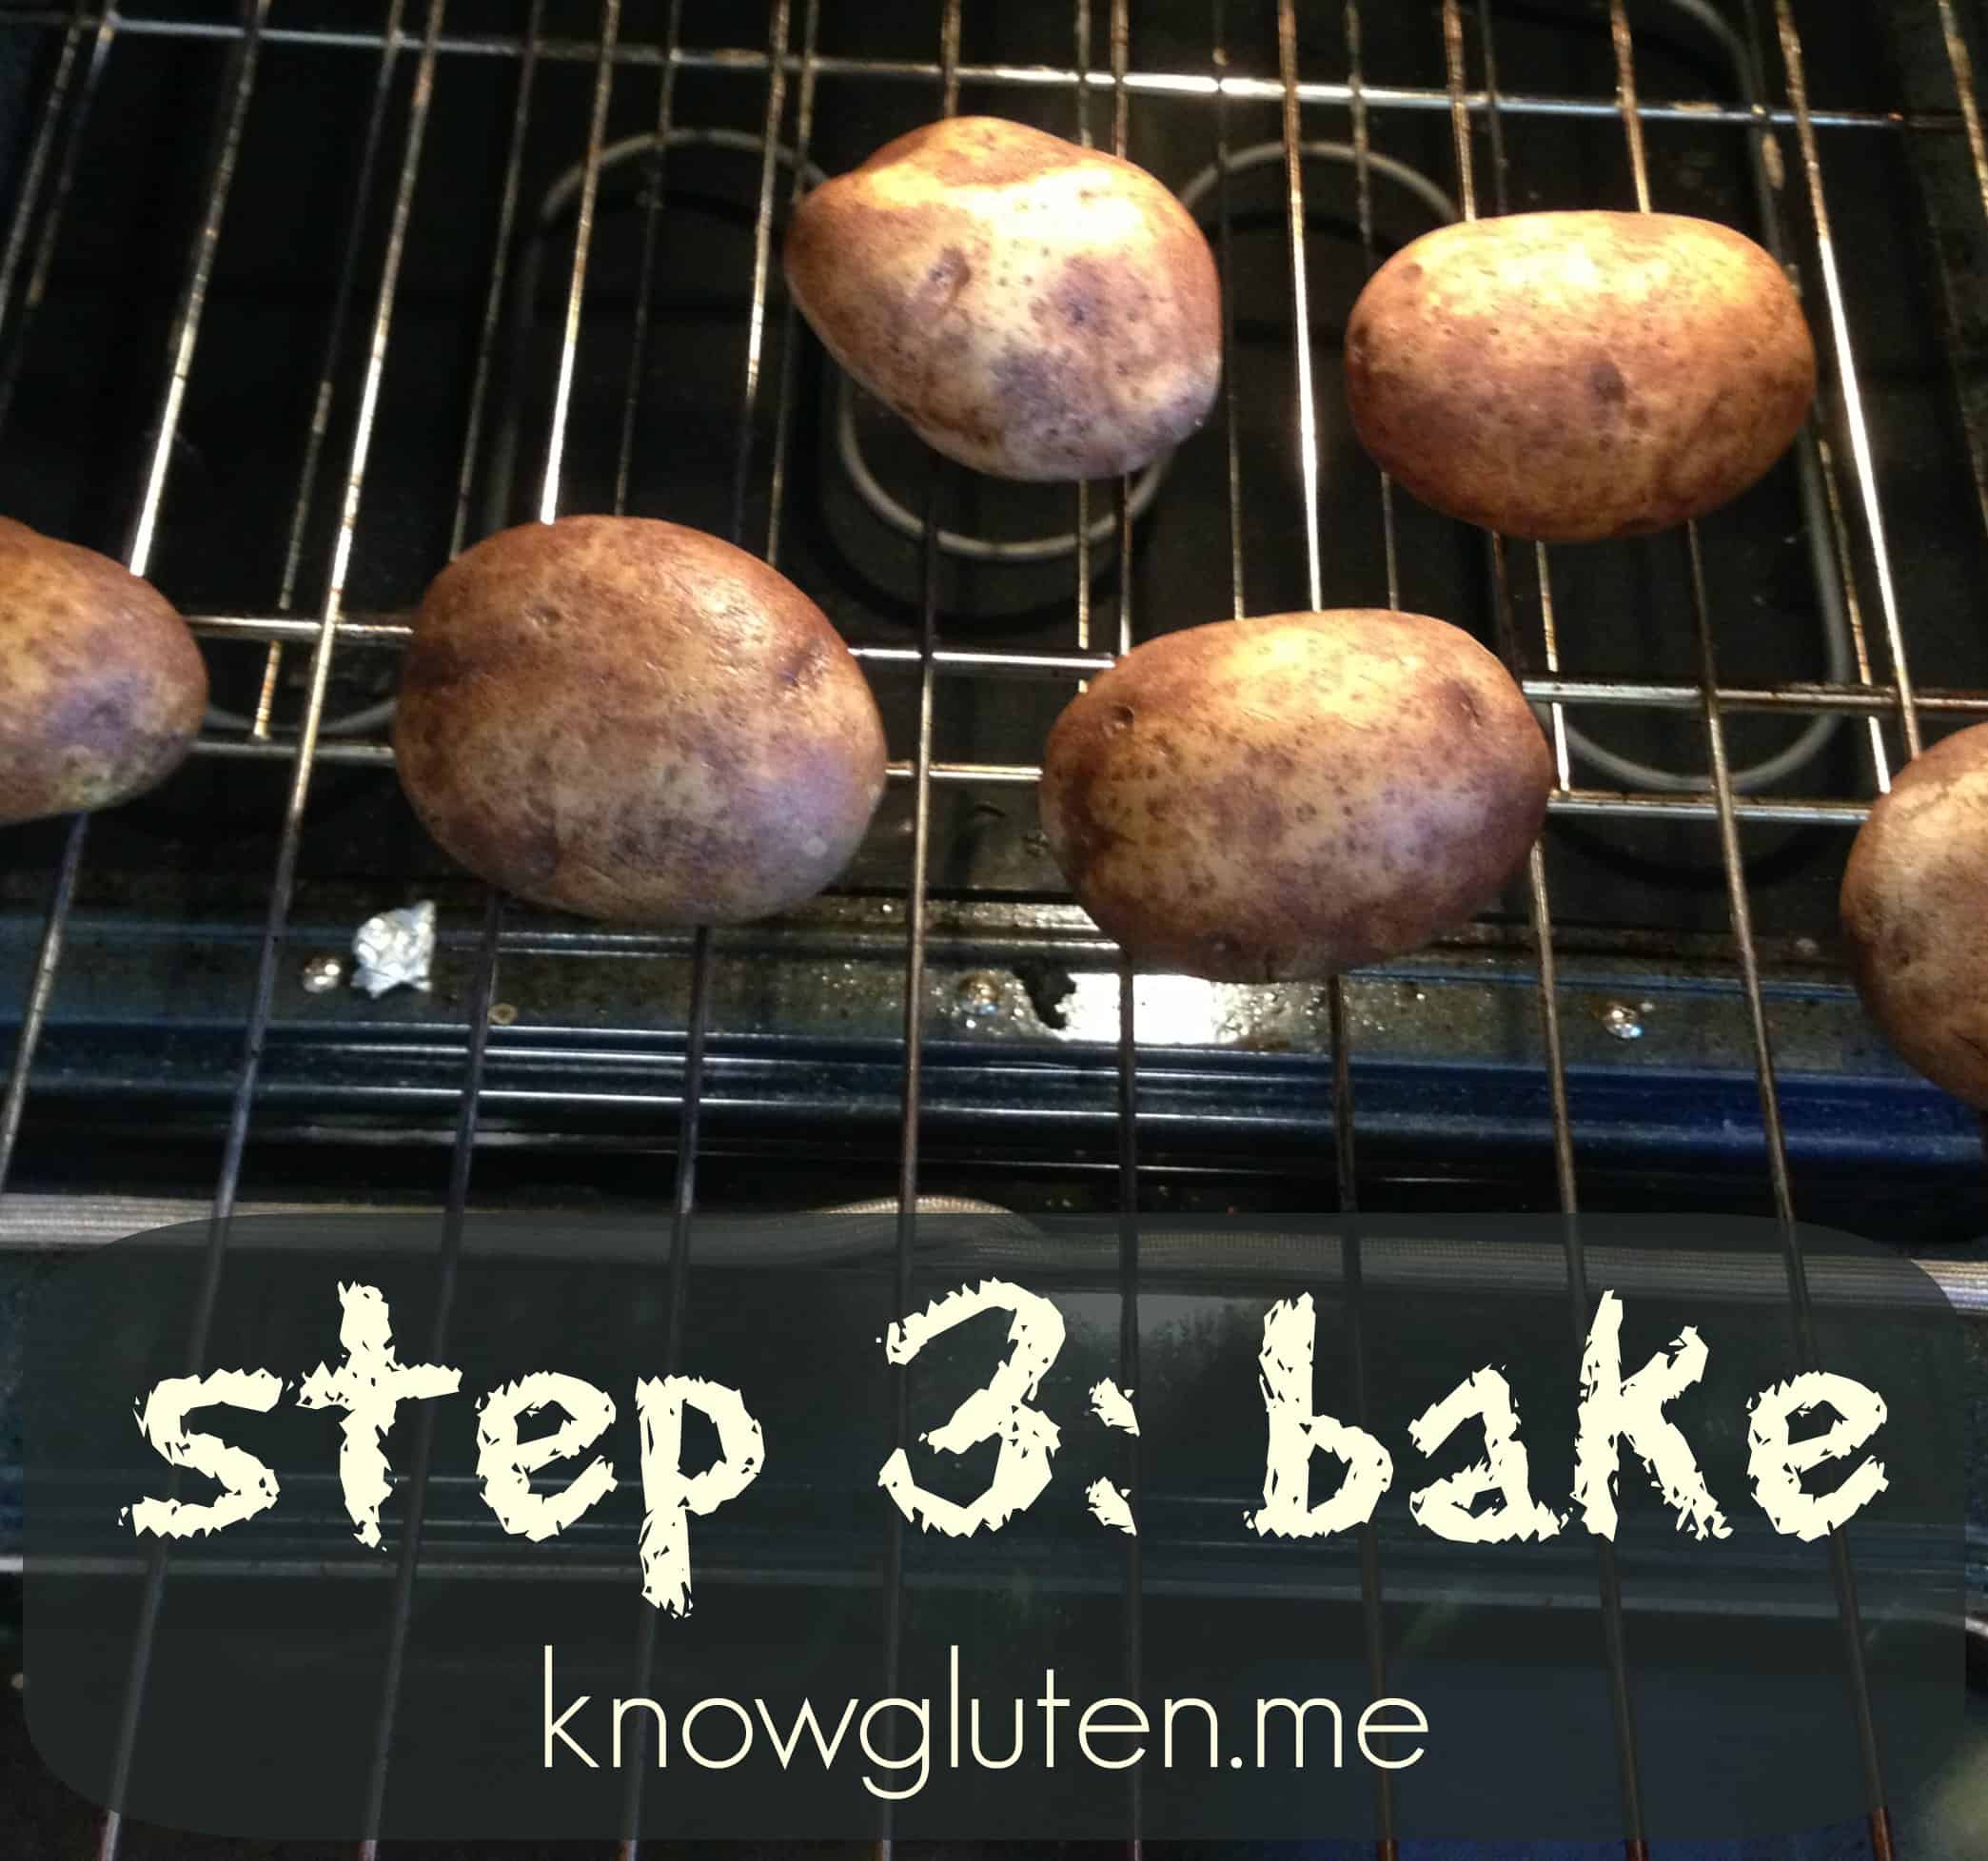 how to make loaded baked potatoes, step 3- bake knowgluten.me